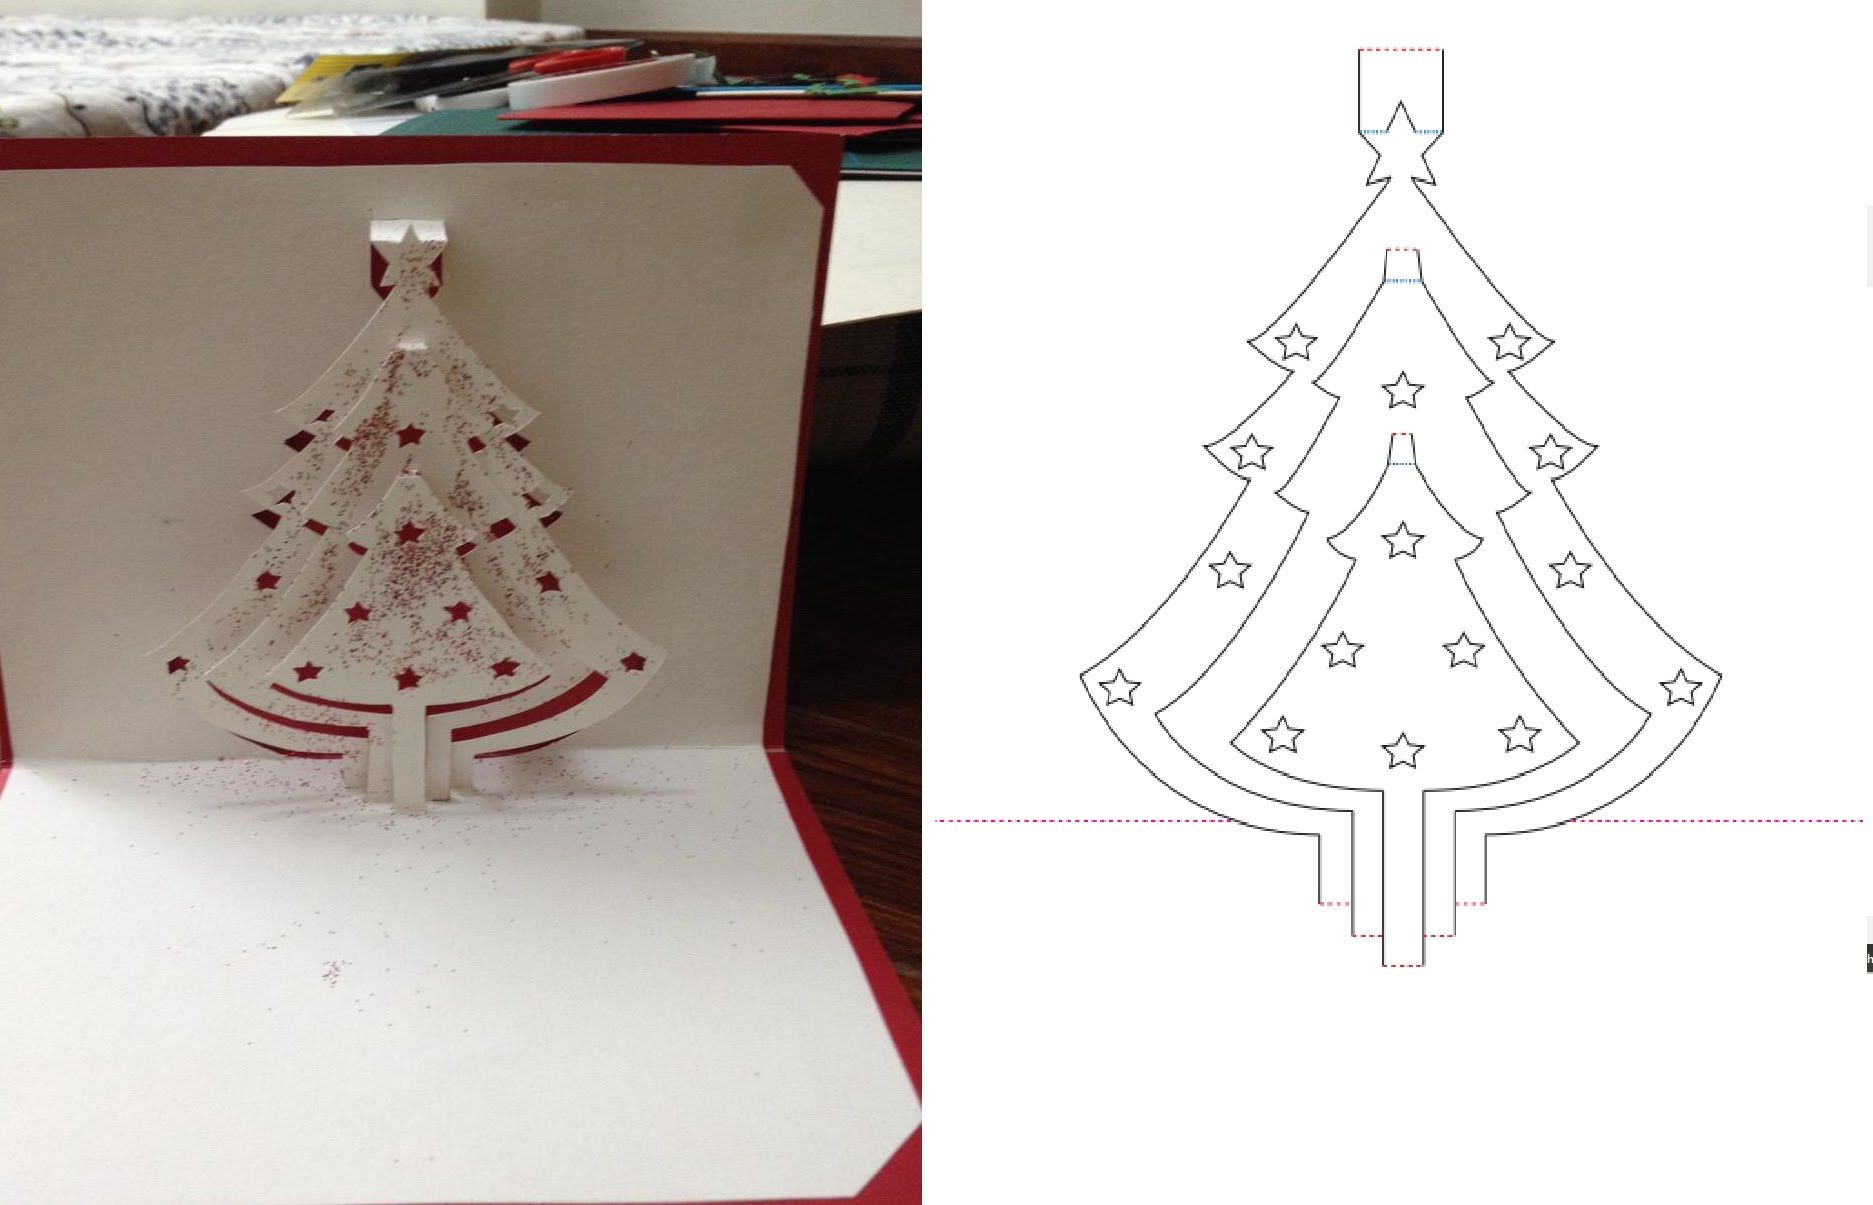 Dyi Christmas Tree Pop Up Card Tutorial – Free Pattern | Pop With Pop Up Tree Card Template